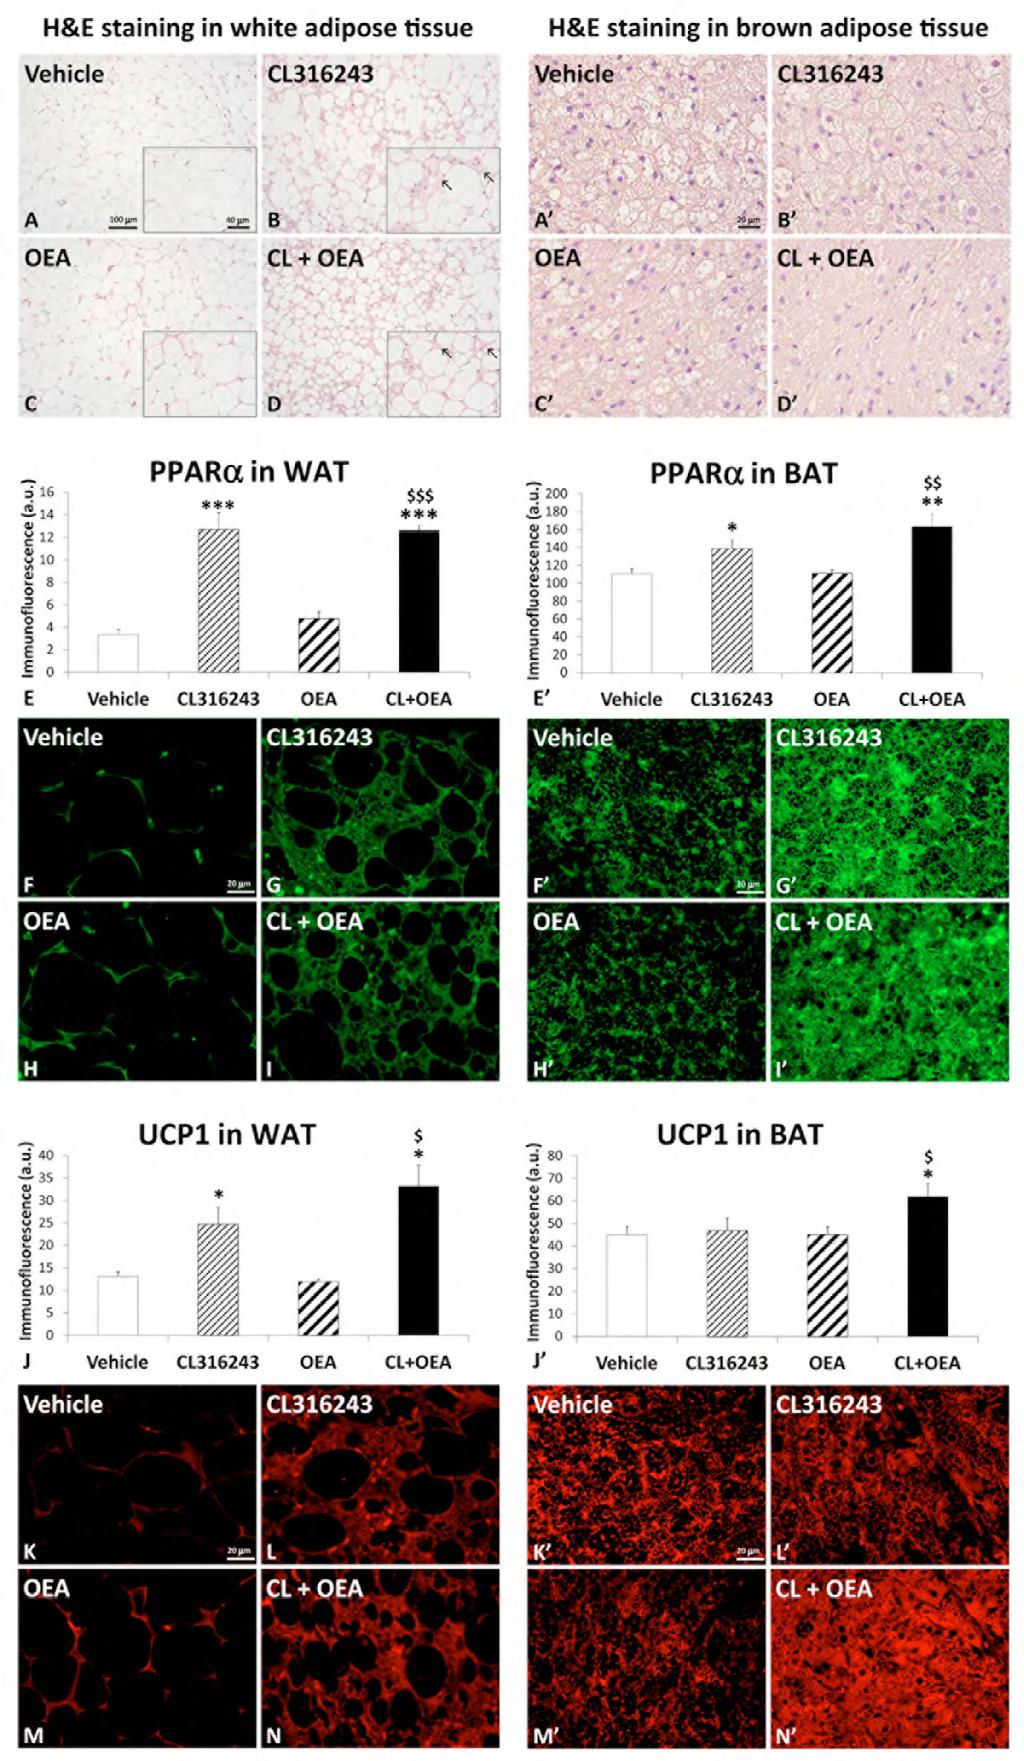 Fig. S4. Effects of repeated administration of CL316243 and/or OEA on the morphology of the white and brown adipocytes and their immunofluorescent levels of PPARα and UCP1 after 6 days of treatment.